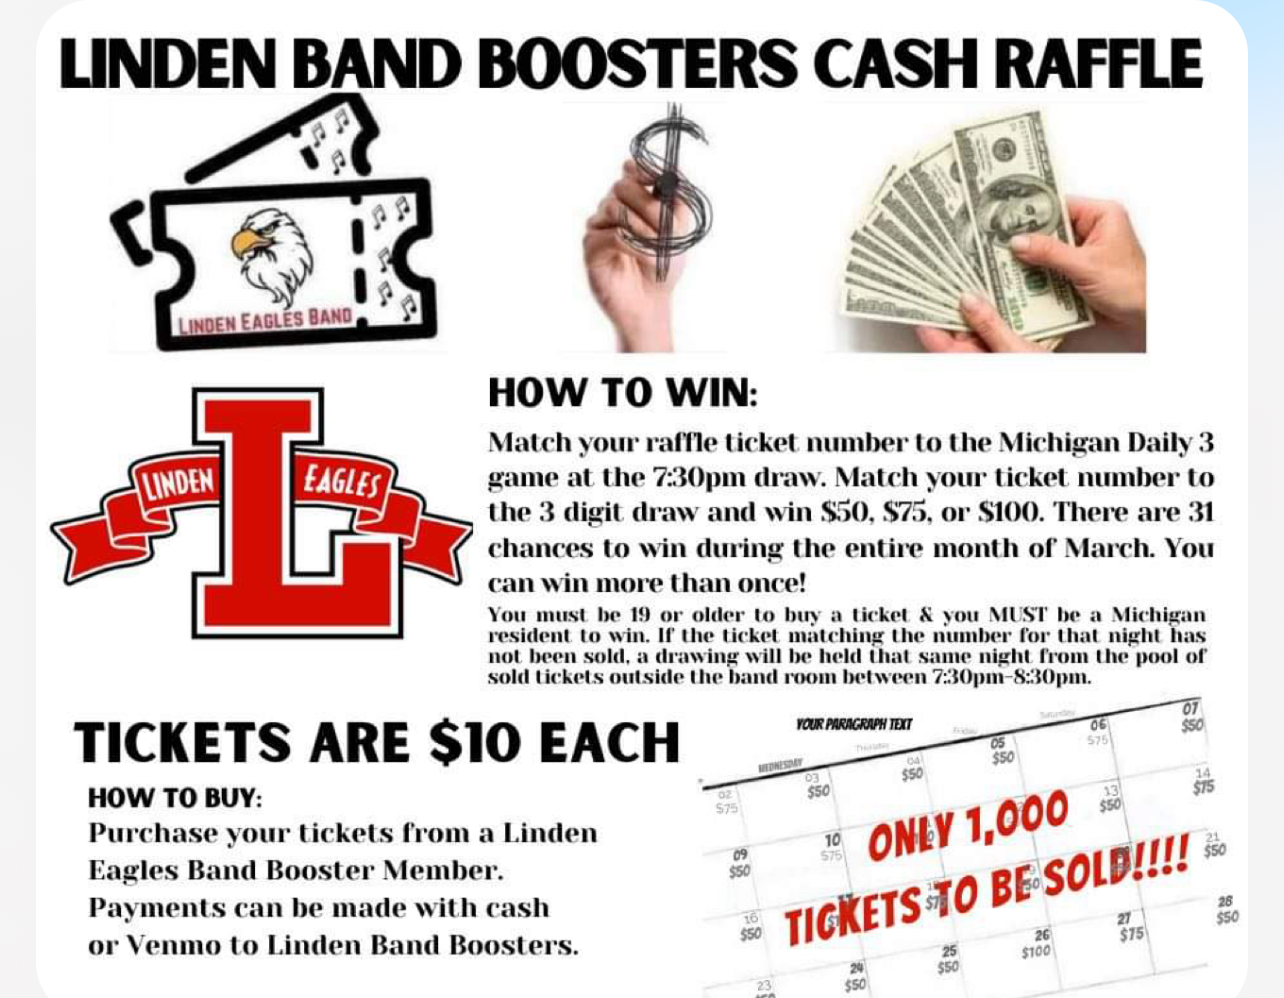 LINDEN BAND BOOSTERS CASH RAFFLE